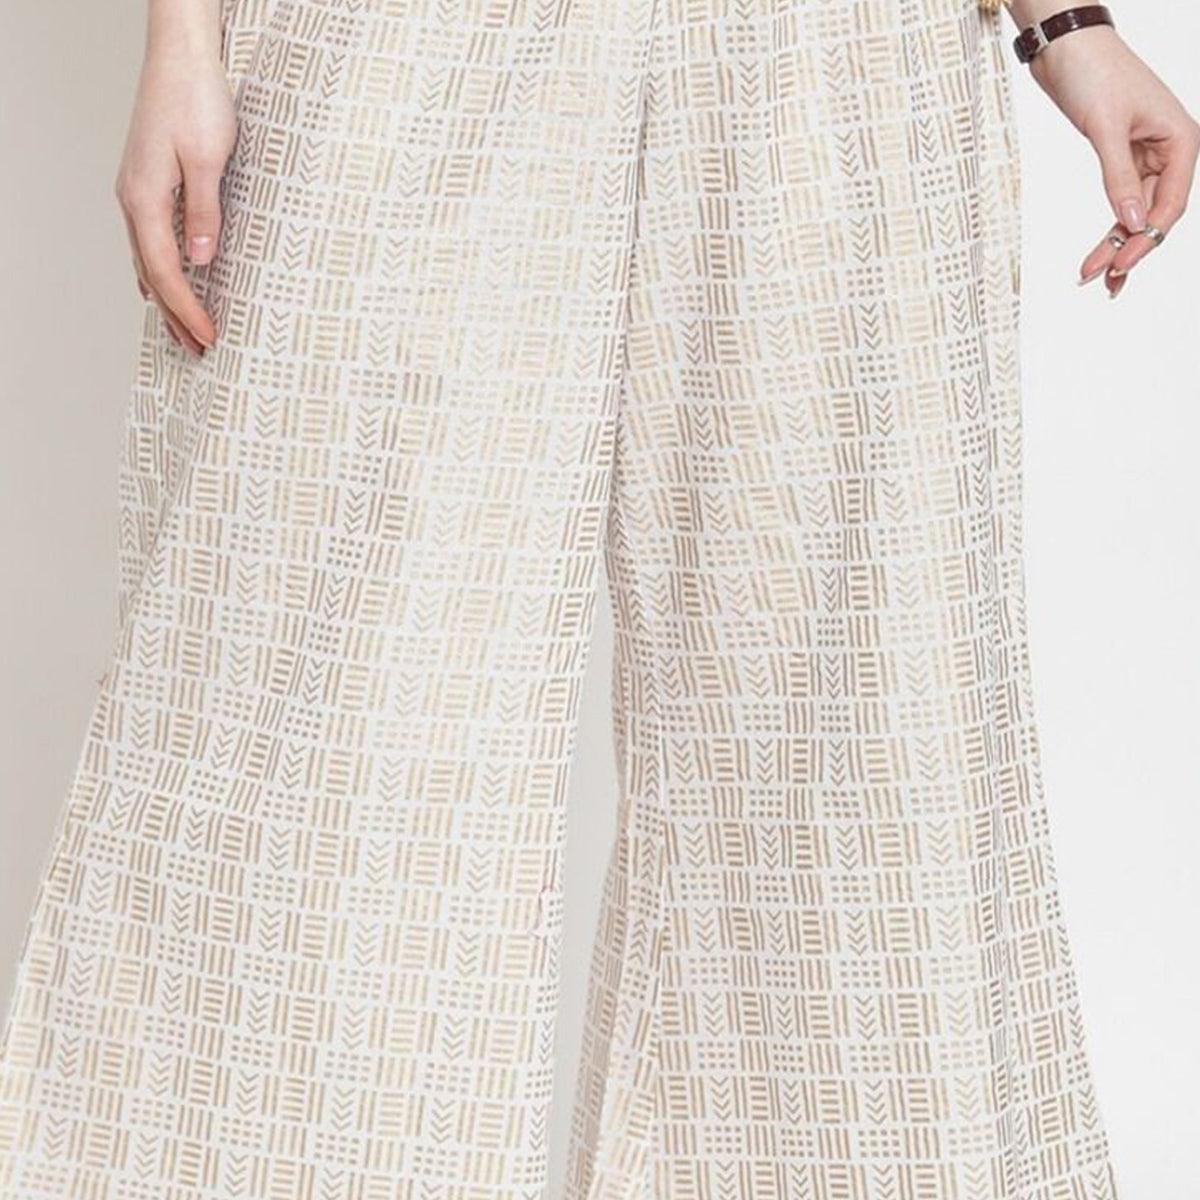 TQWQT Women's Cotton Linen Wide Leg Pants Summer Casual High Waisted Palazzo  Pants Baggy Lounge Beach Trousers with Pocket,White XL - Walmart.com